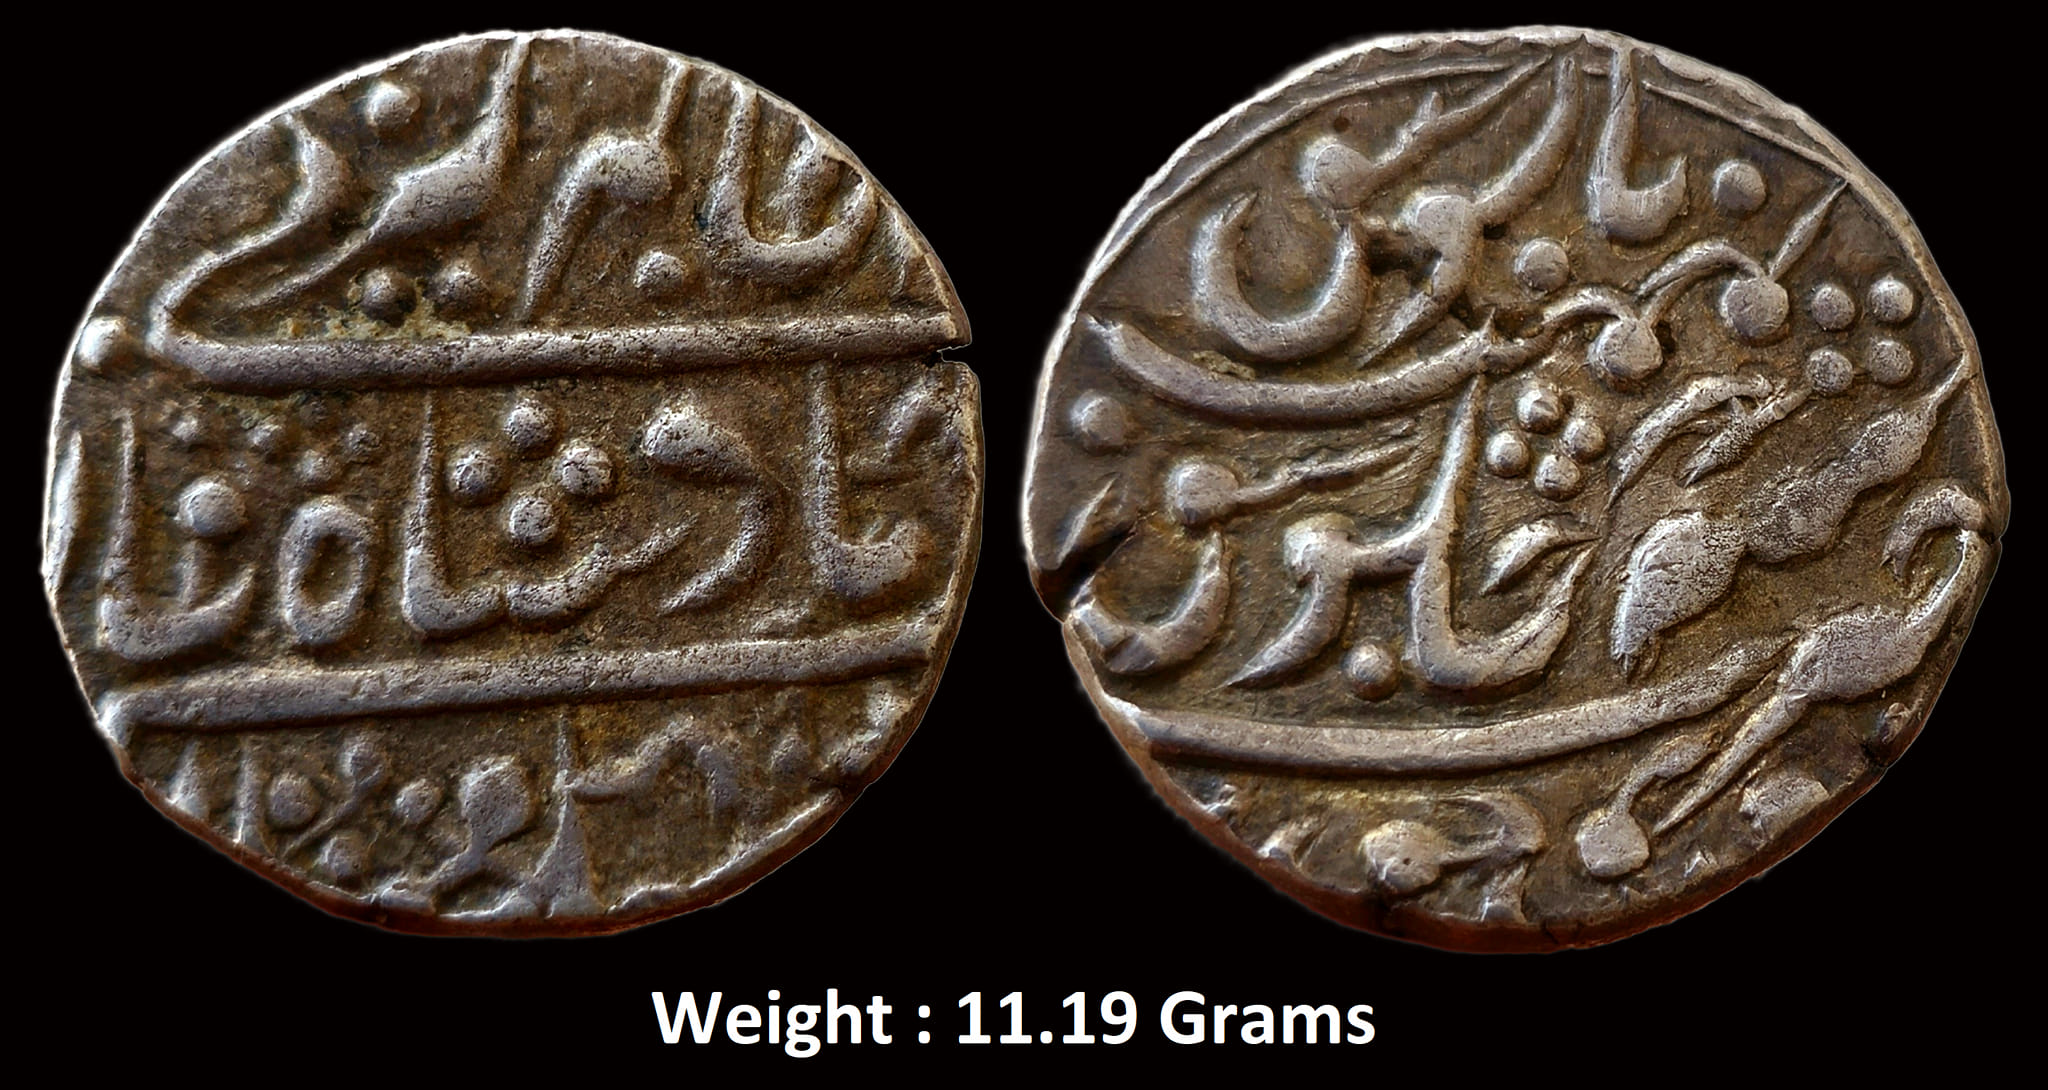 PRINCELY STATES - KARAULI 
Tursam Pal (1757-1772 AD), Silver Rupee, 11.42g, Sawai Jaipur (Pseudo mint-name), in the name of Alamgir II, AH 11XX/3, Unpublished (for similar specimen see Todywalla Auctions 56 Lot No. 1009). 
Very Fine+, Extremely Rare. One of the earliest coins of the state.